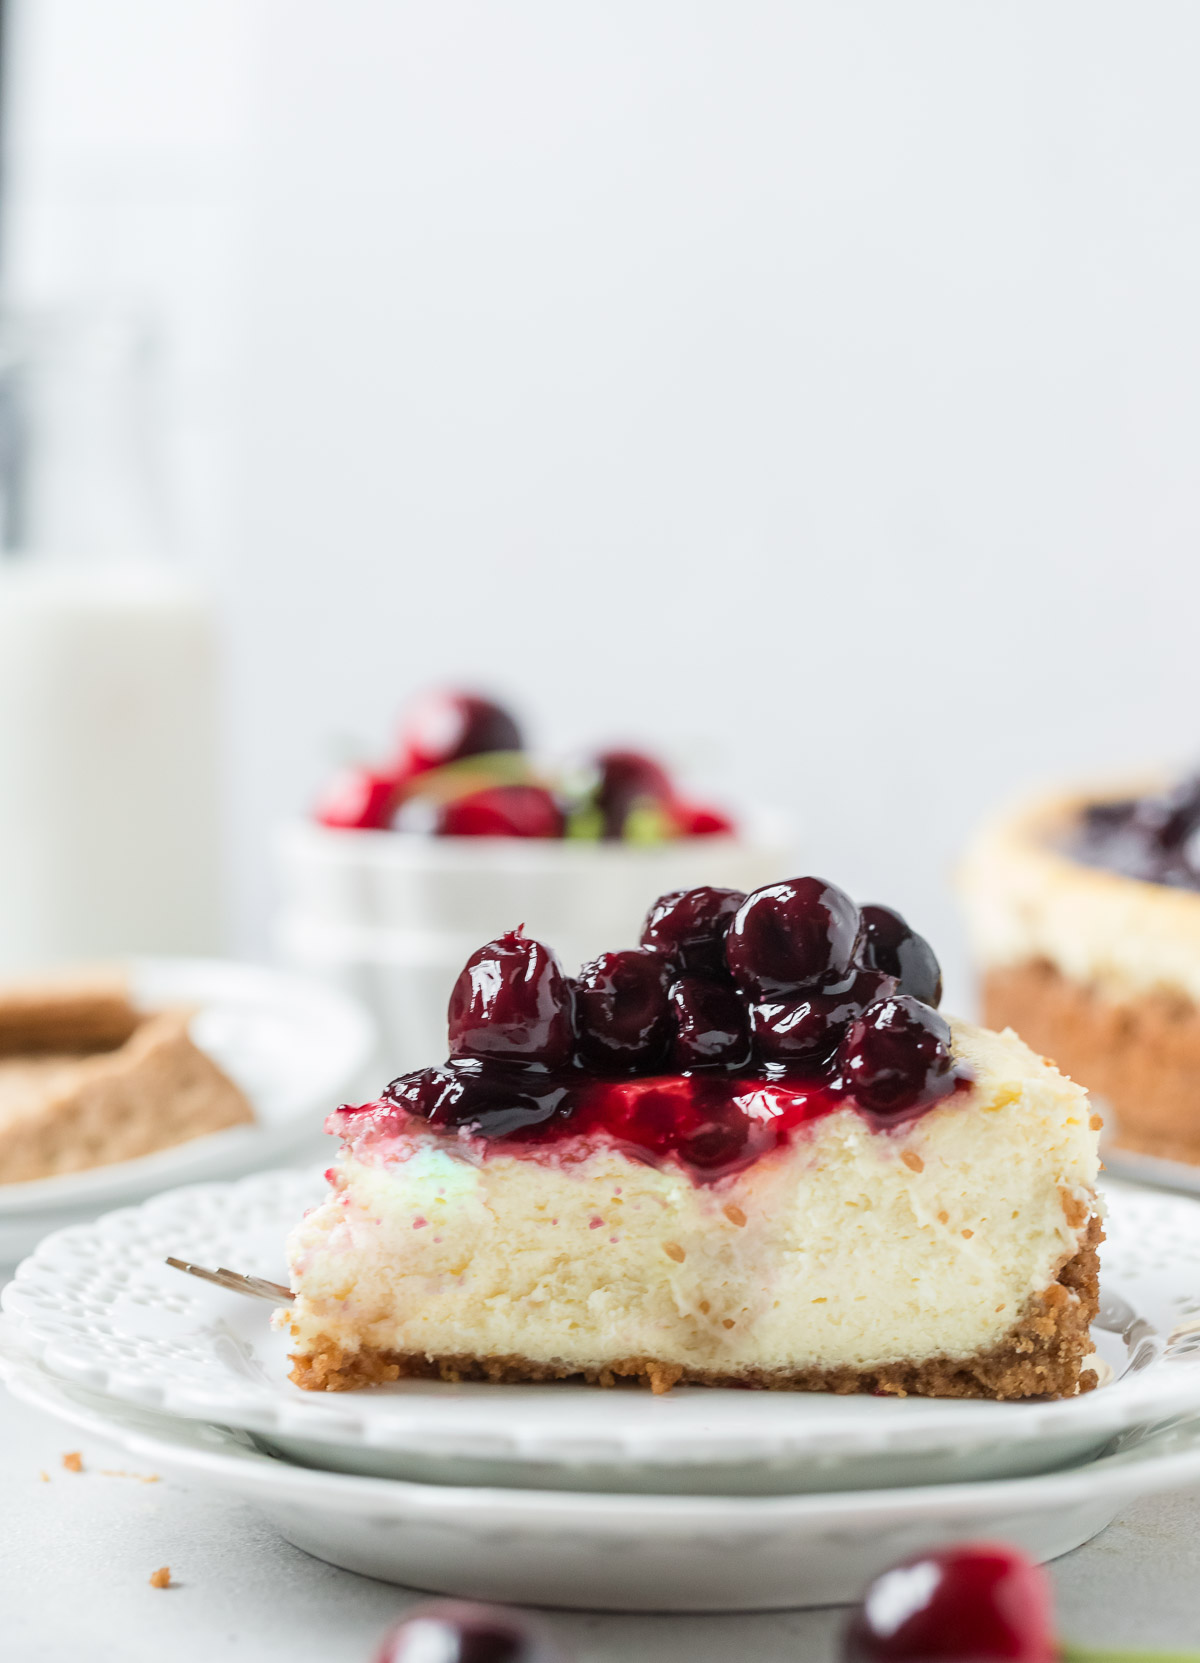 slice of cherry cheesecake on a plate